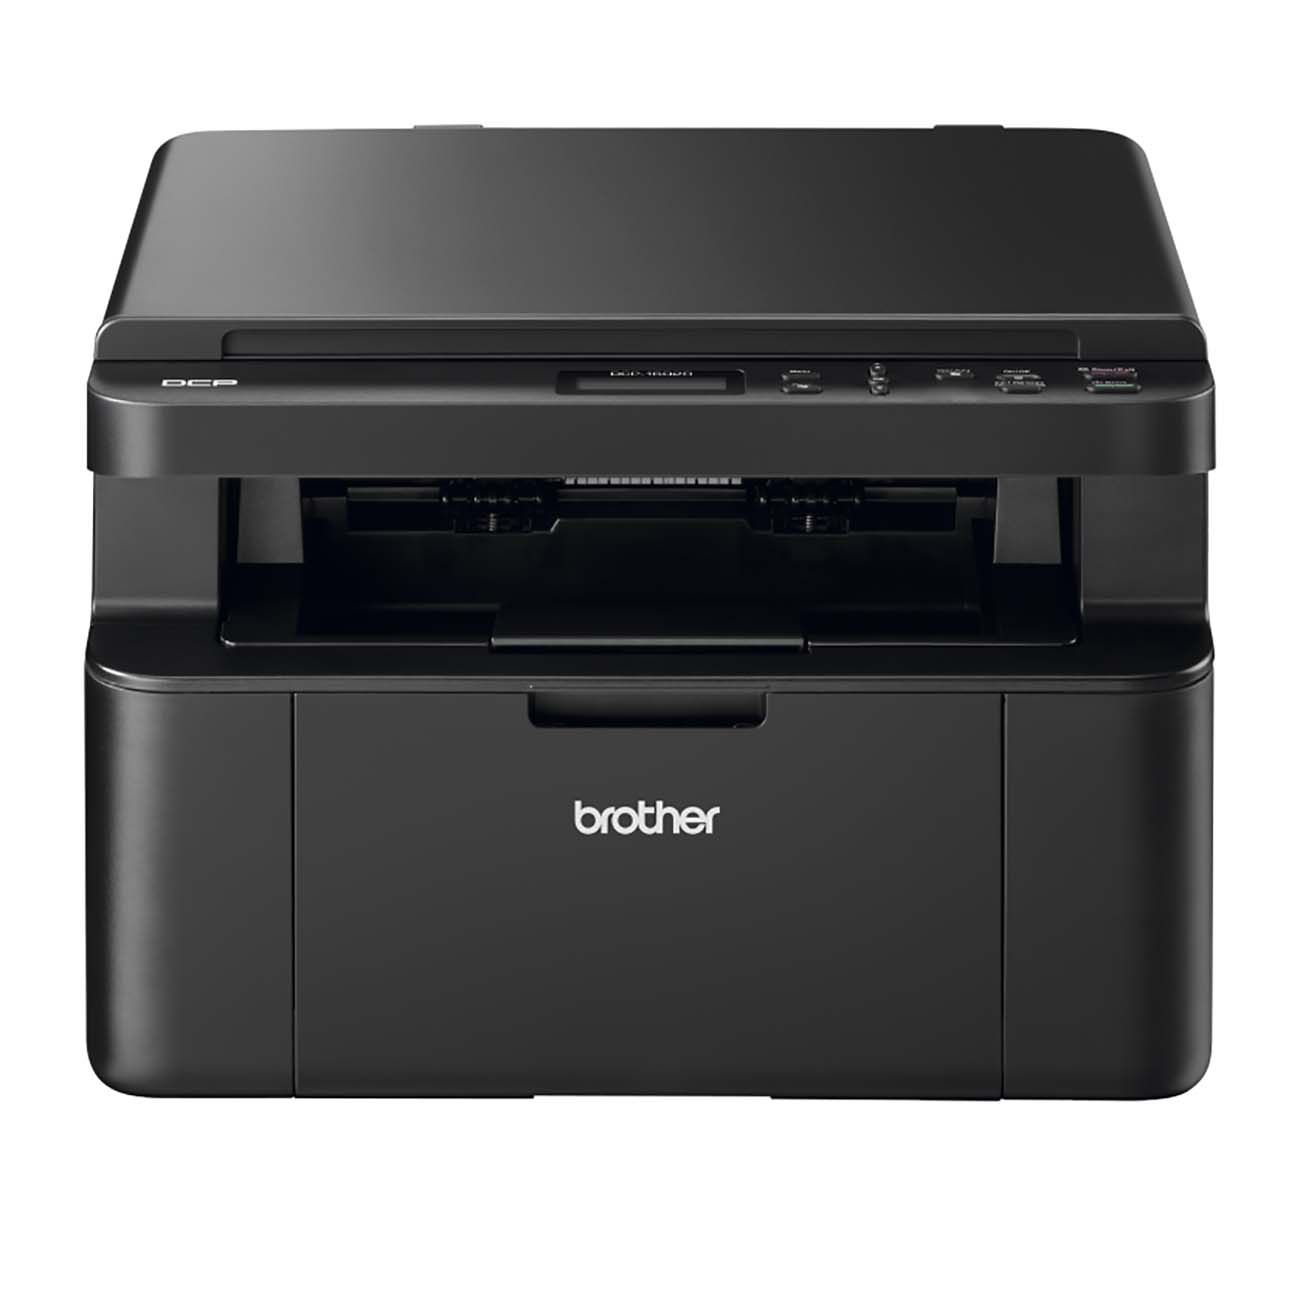 Brother dcp 10. Brother DCP-1602r. Принтер brother DCP 1602r. МФУ brother DCP-1602r. МФУ brother DCP 7557r.